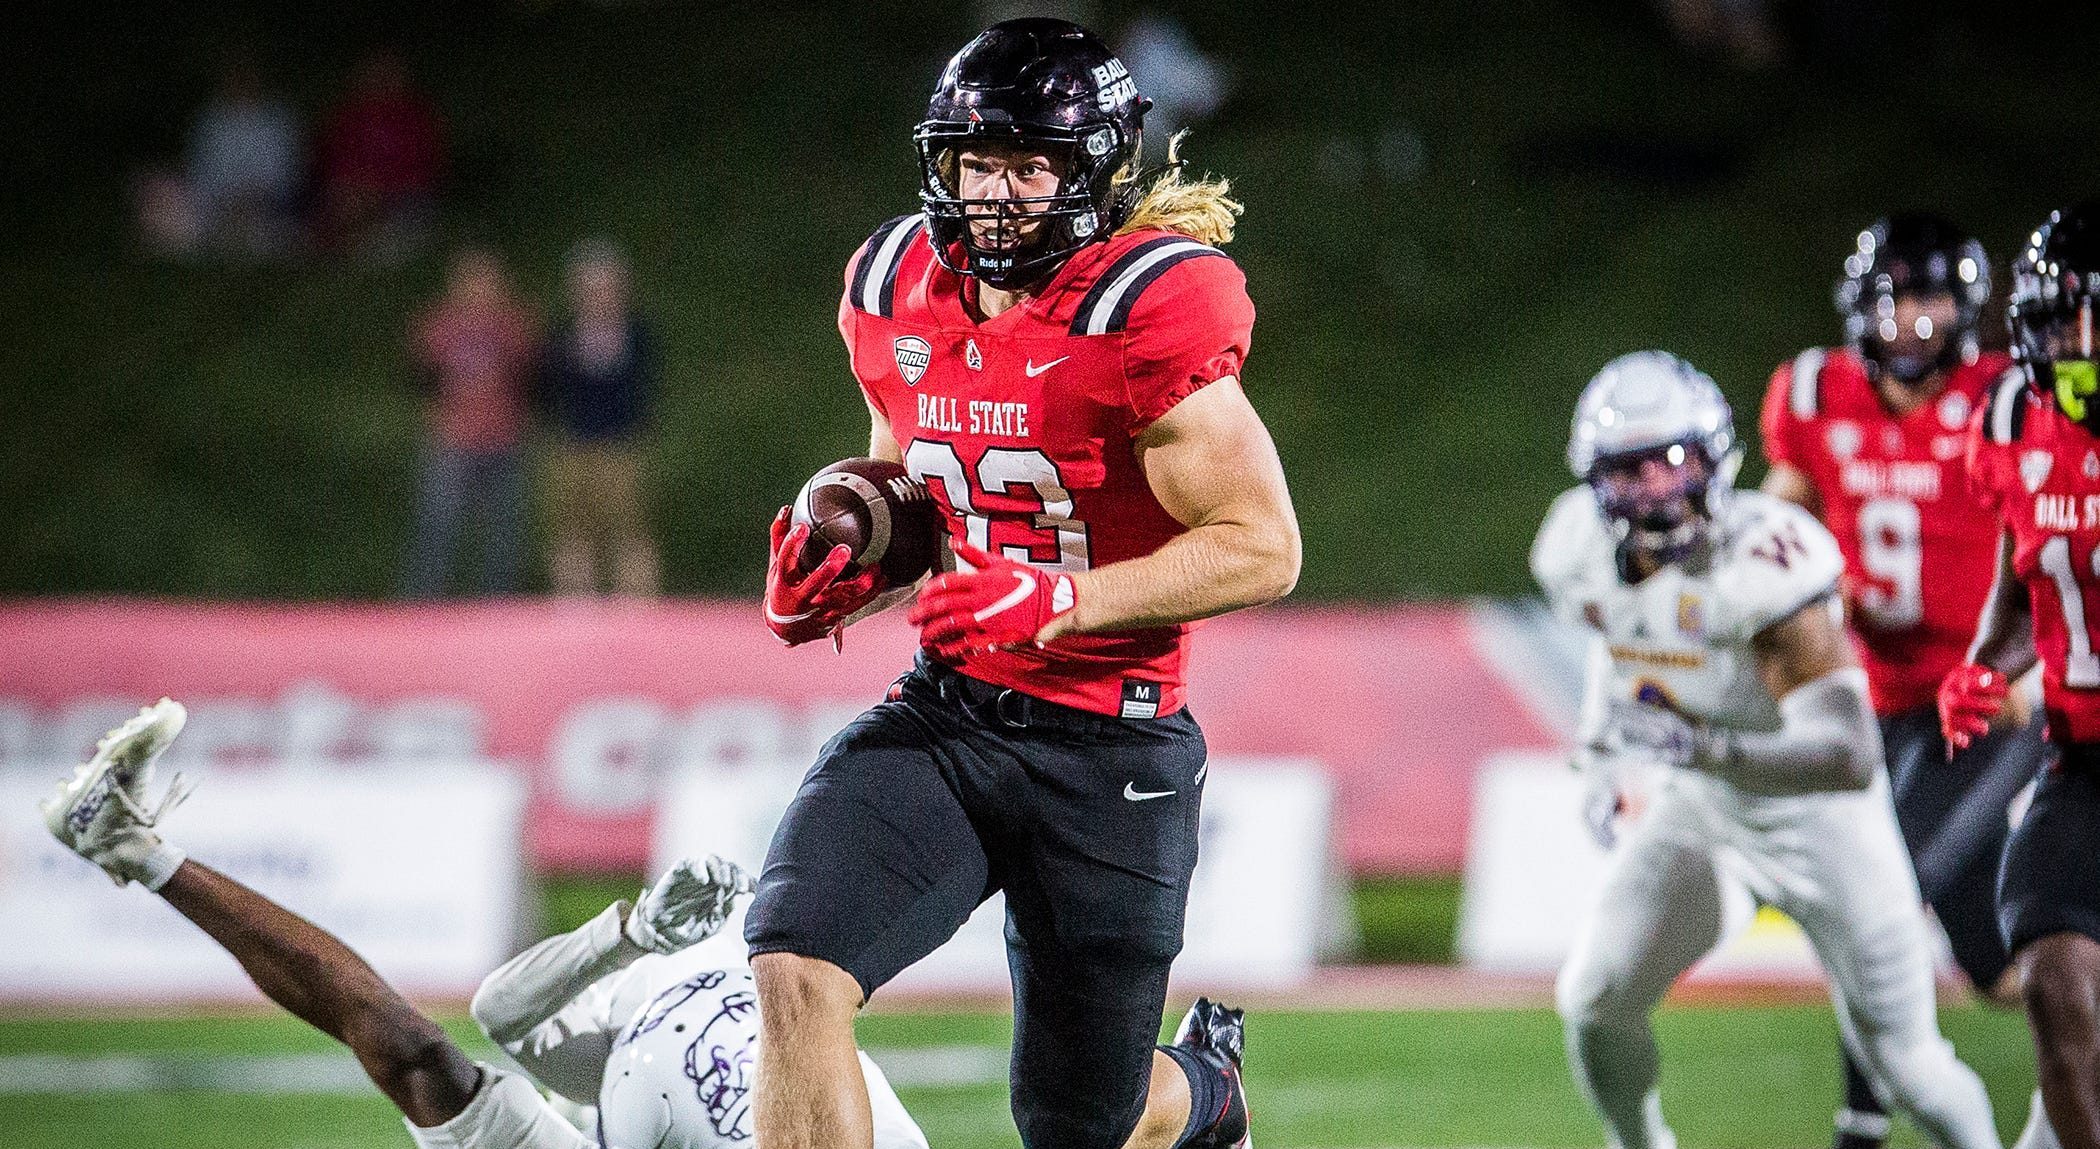 Star running back Carson Steele announced his intentions to transfer from Ball State.